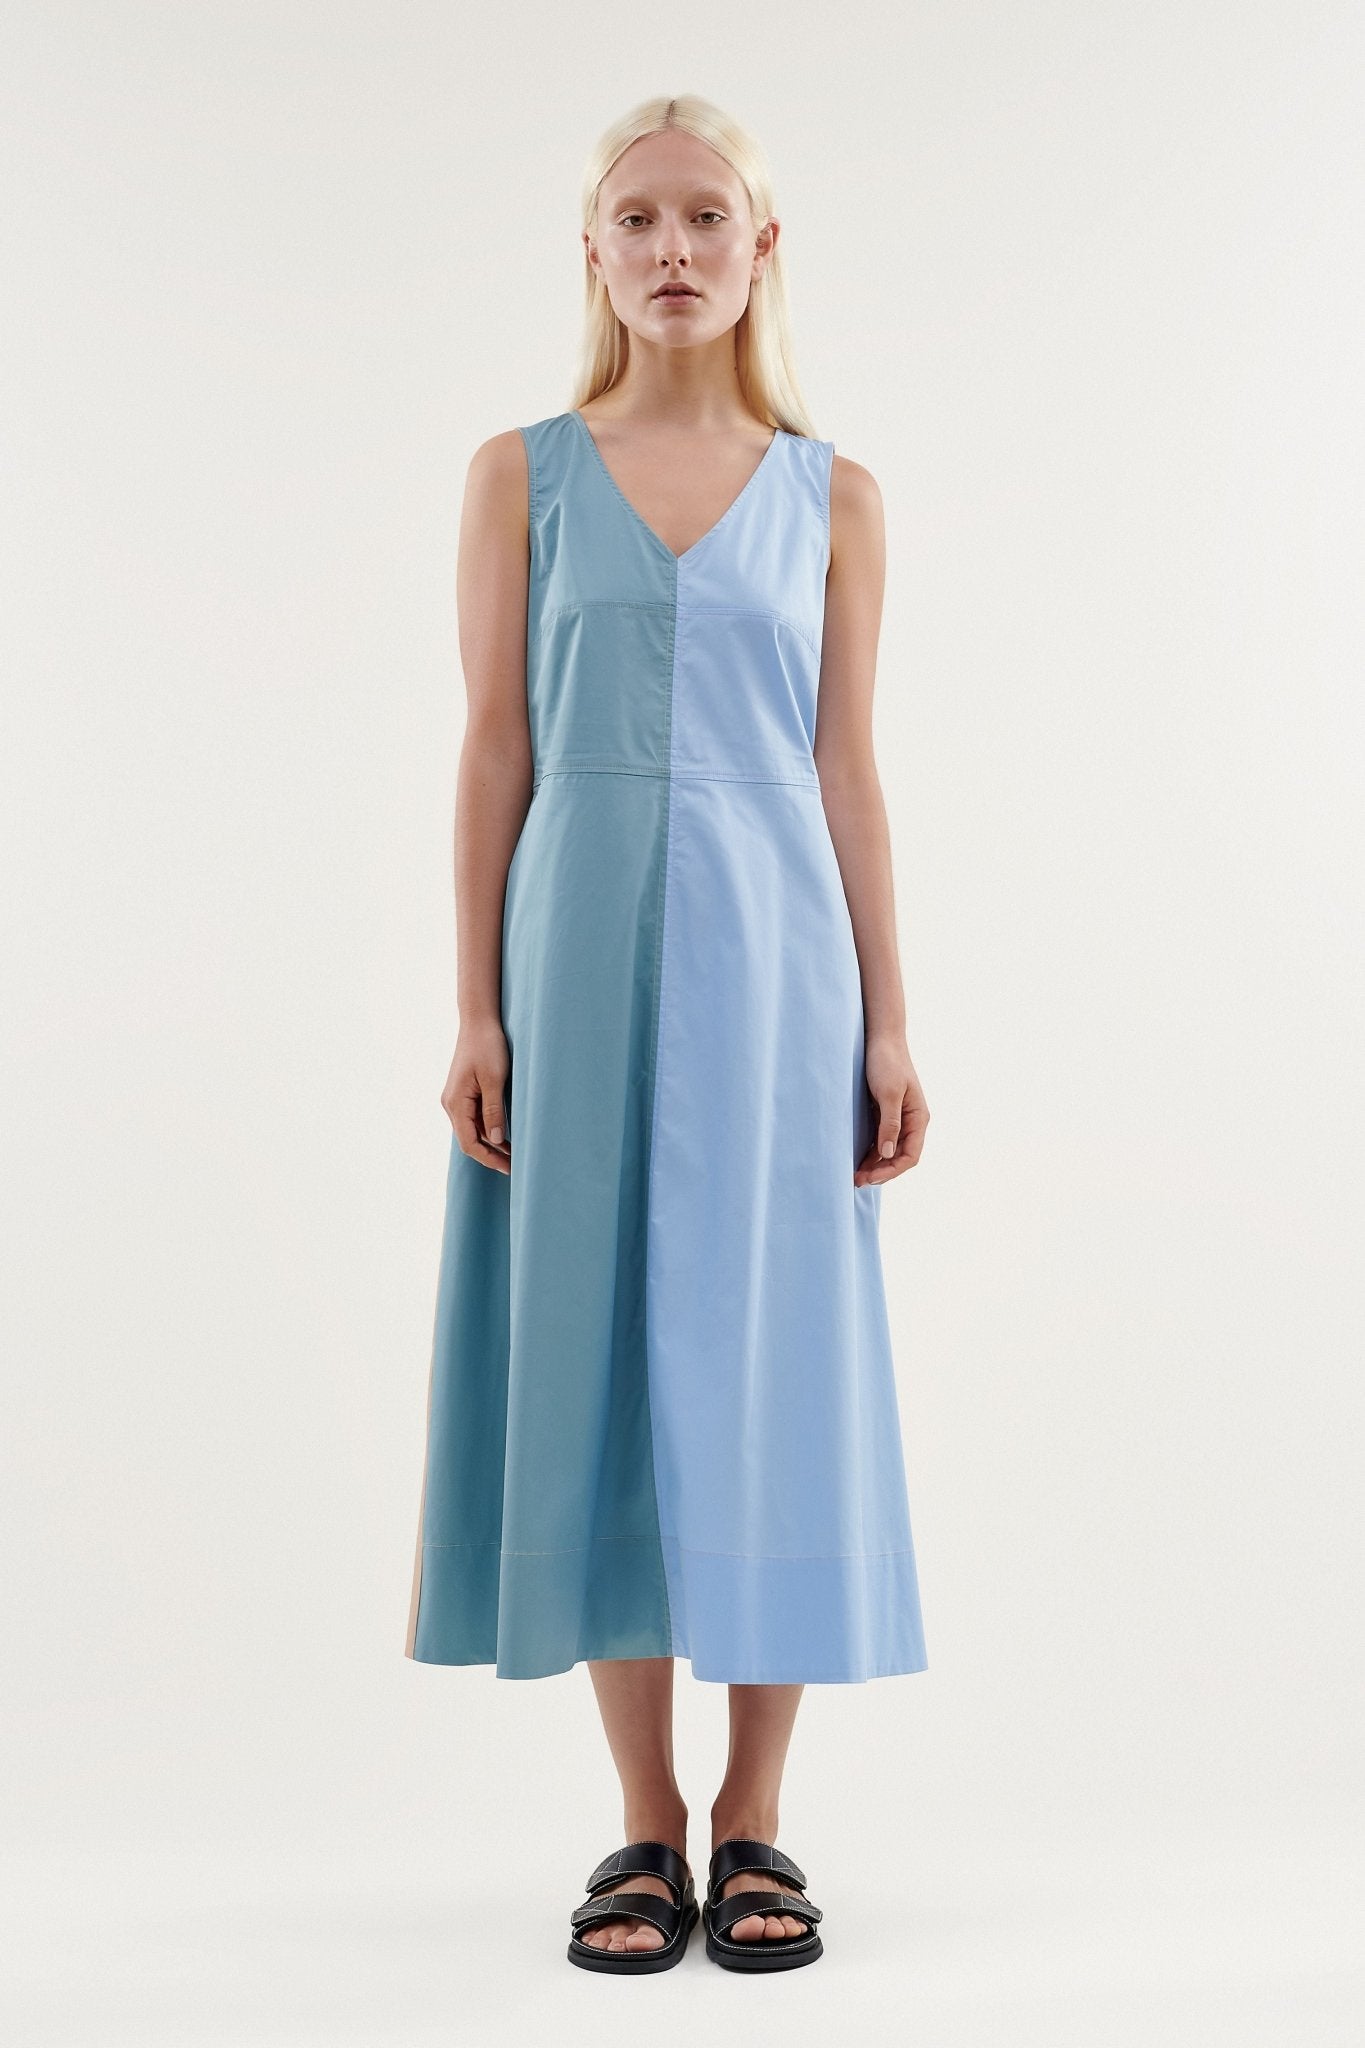 Shop Spliced Tys Dress in Myrtle Green / Ivy Blue / Paled Bark by Layer'd - Layer'd